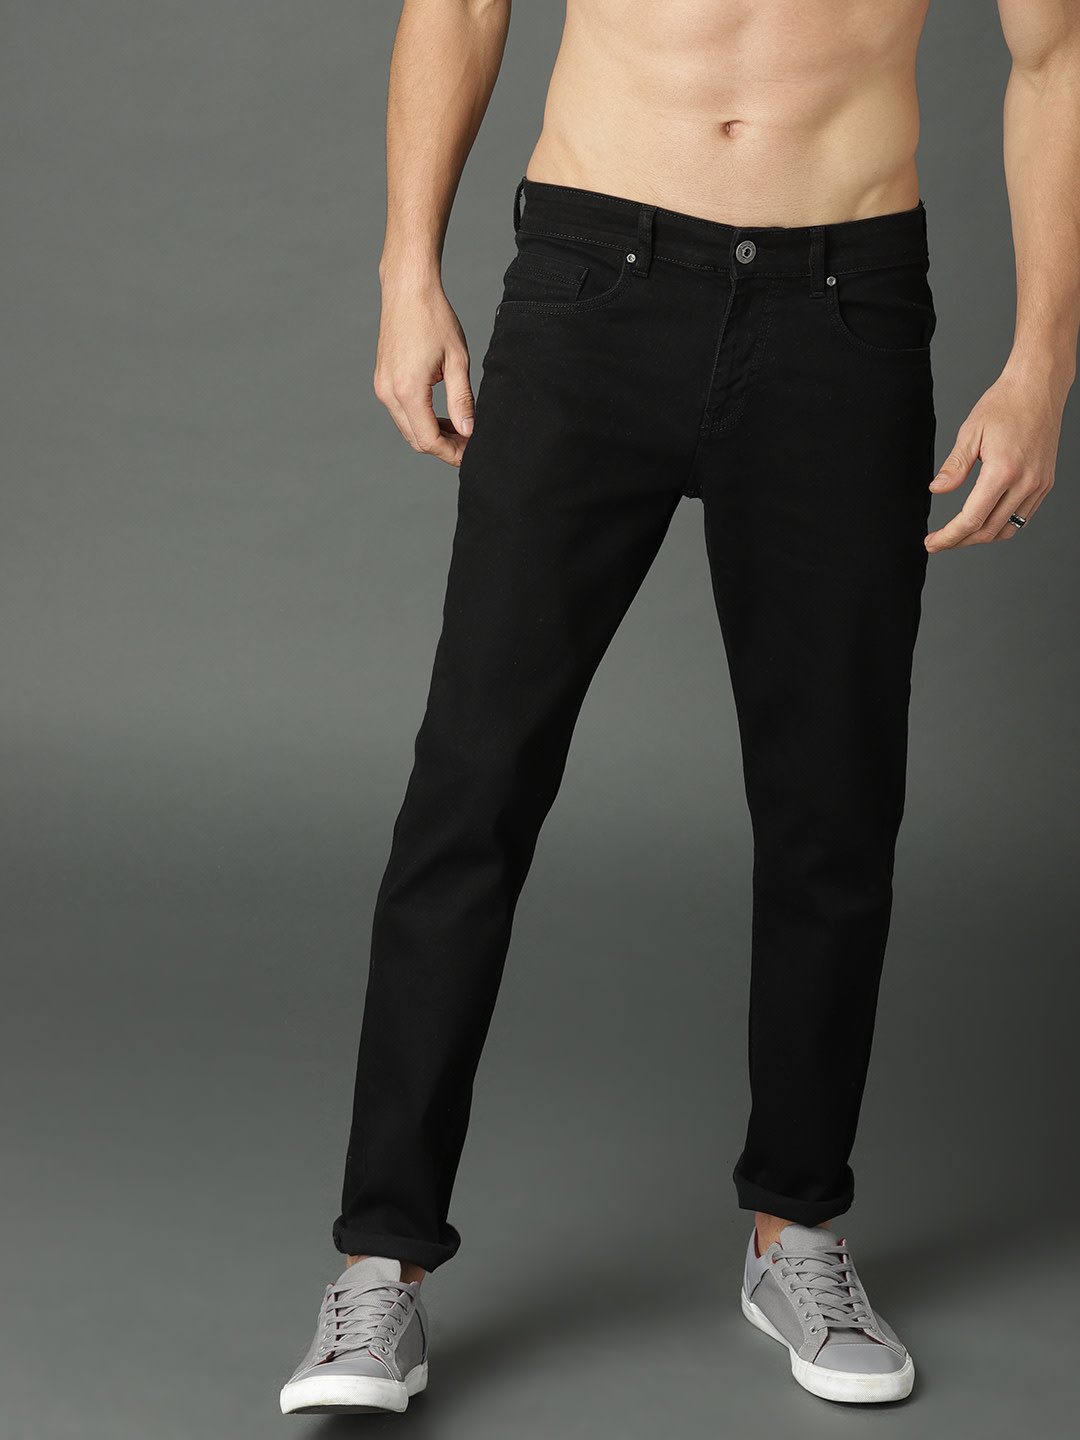 Polyknitted Solid Plain Black Jeans